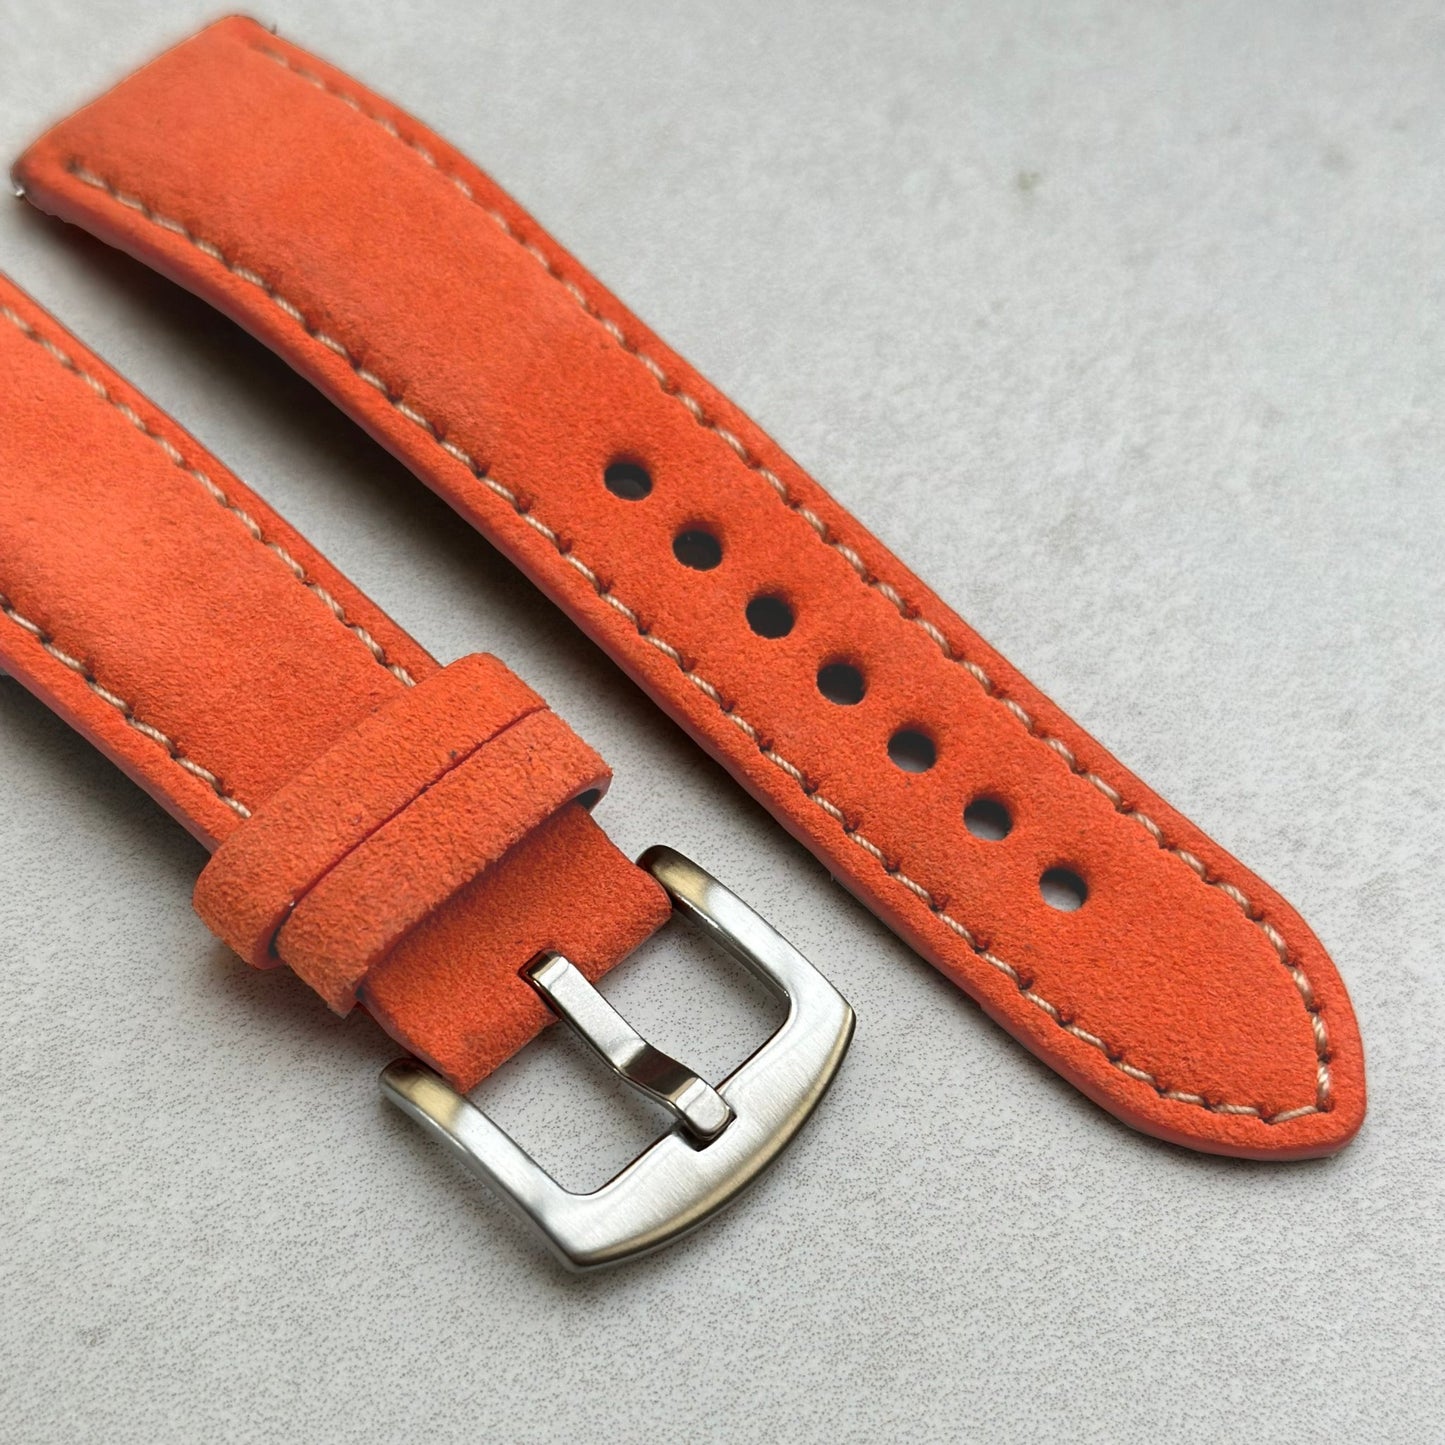 Brushed 316L stainless steel buckle on the Paris orange suede watch strap. Watch And Strap.